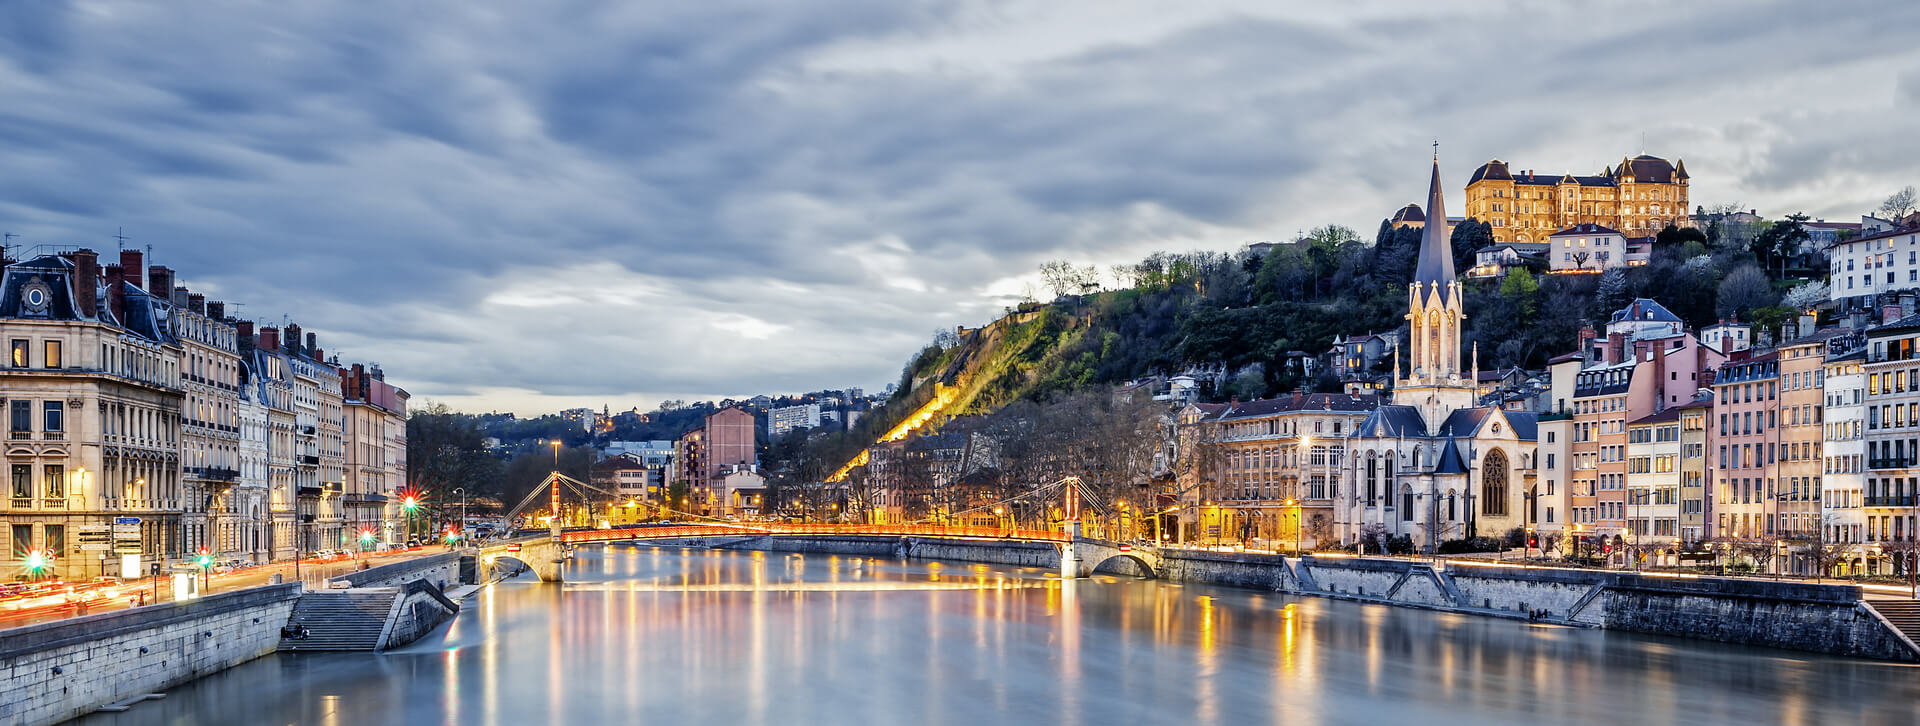 Saone river in Lyon in the evening, France
